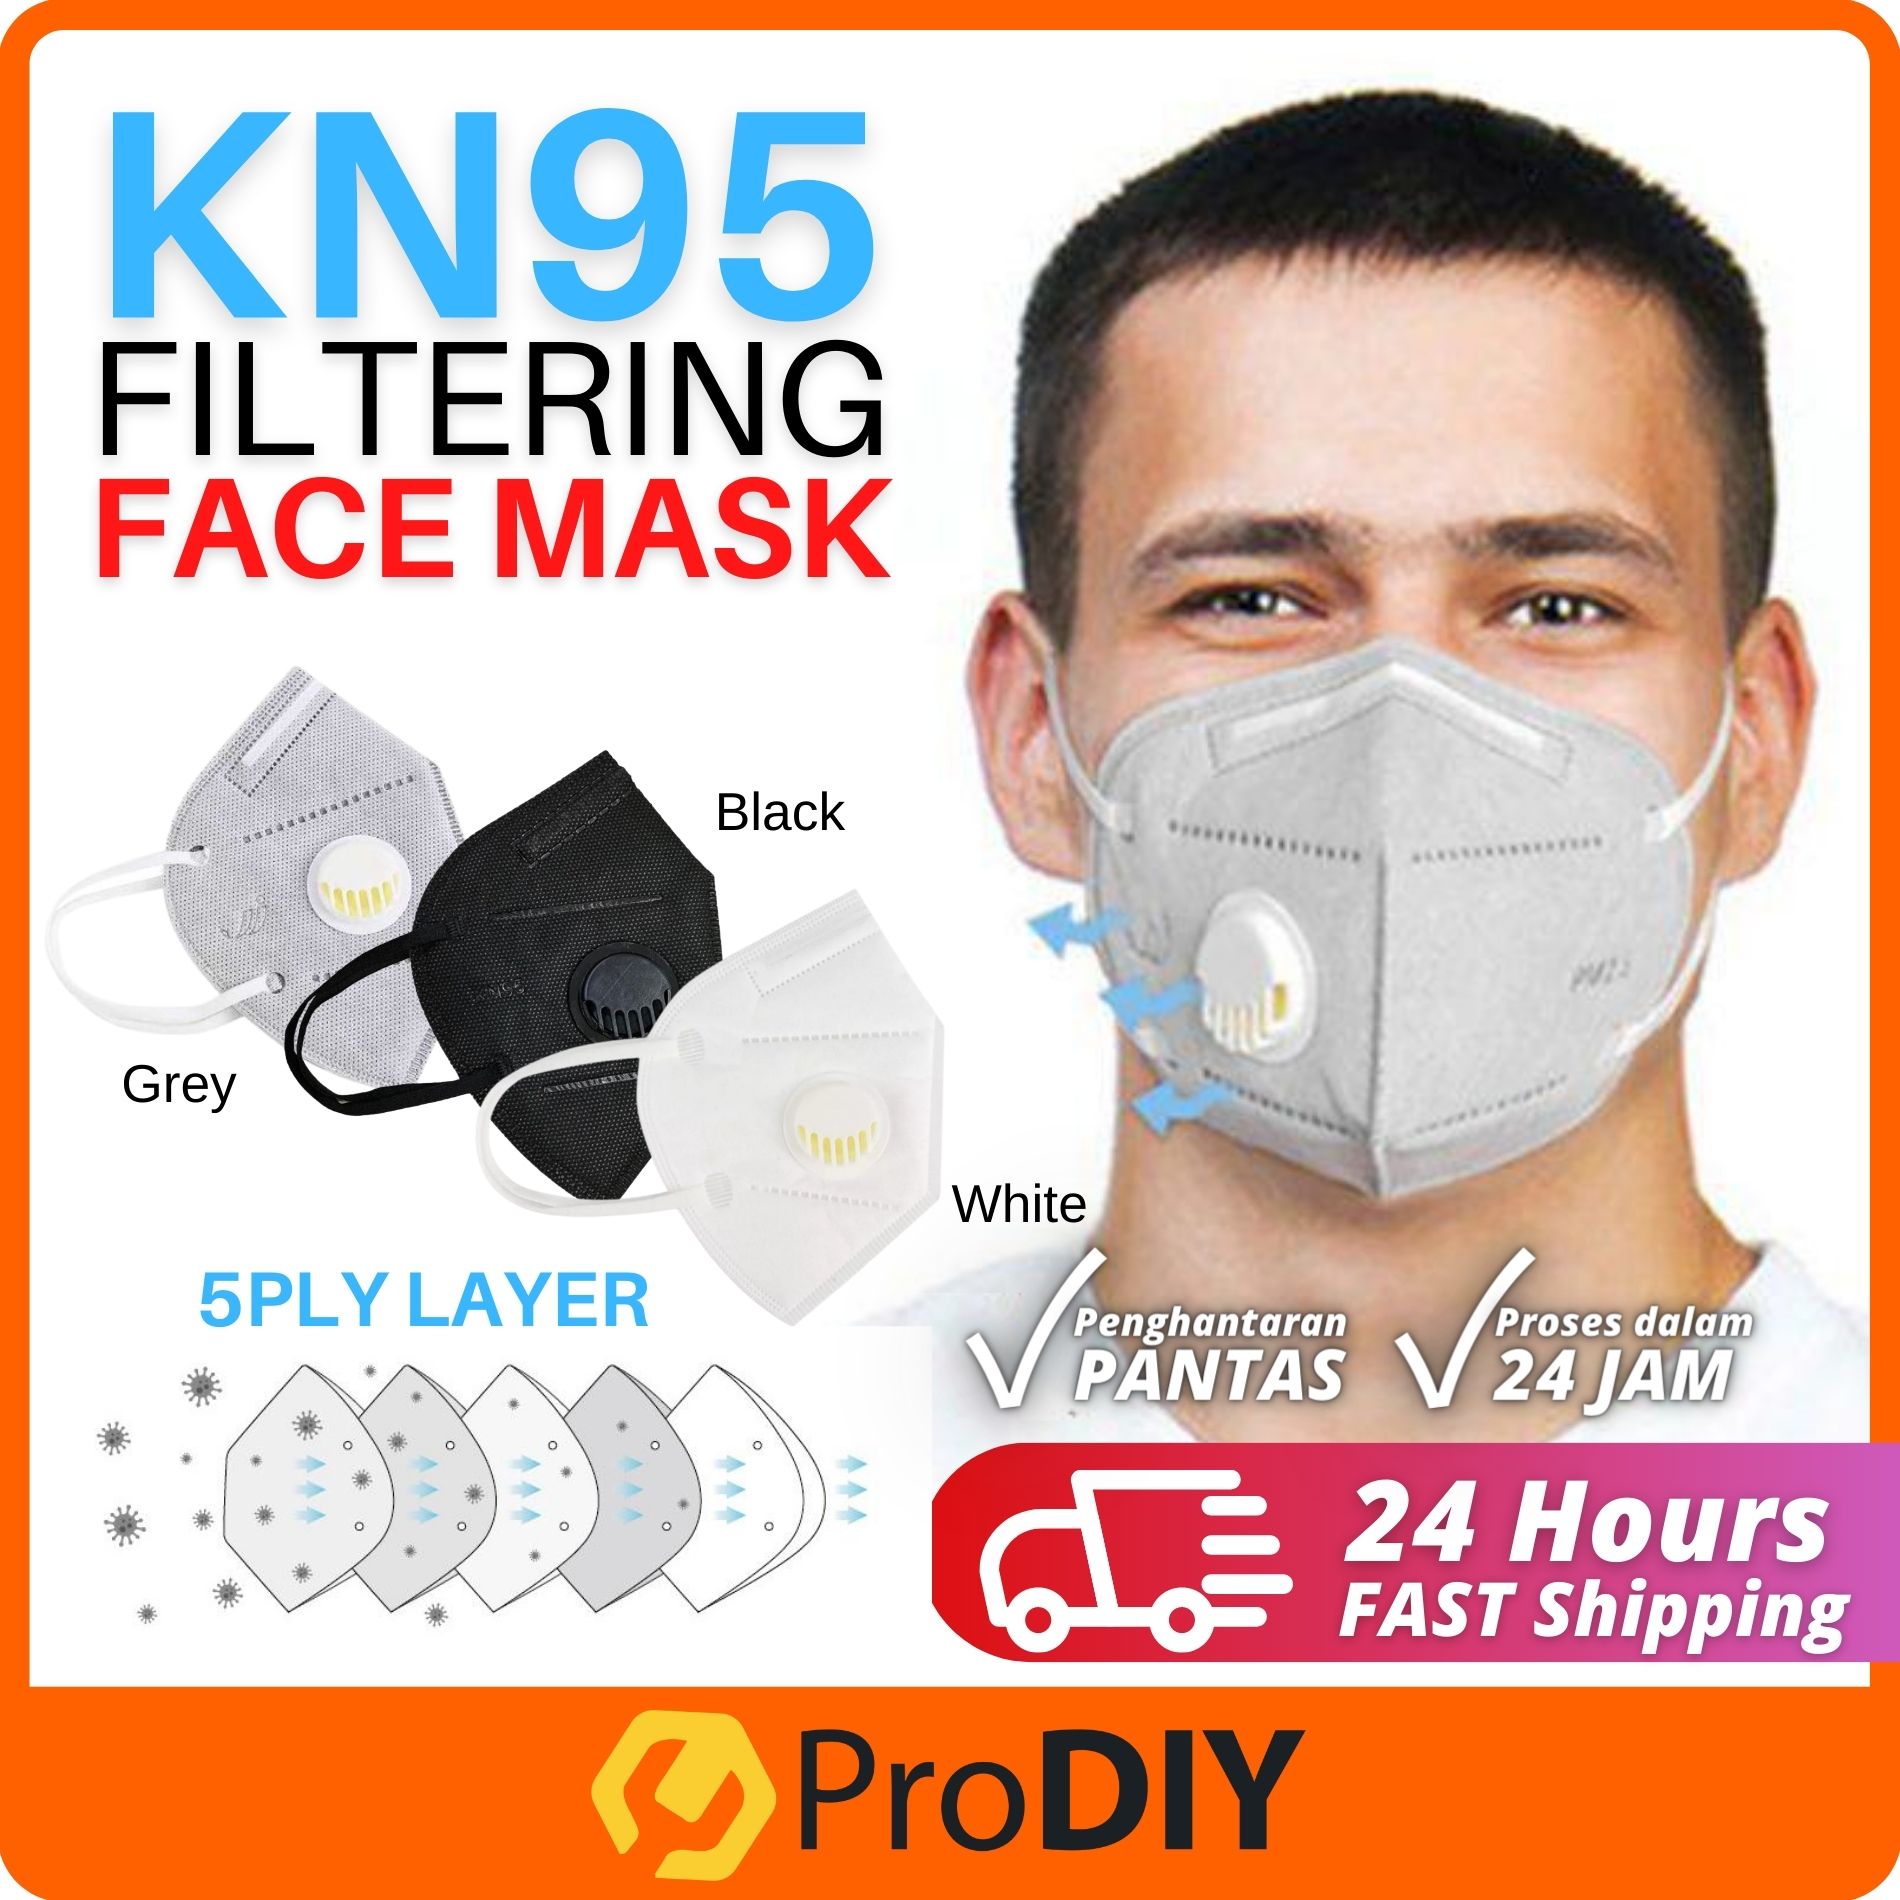 Mask malaysia kn95 The Best